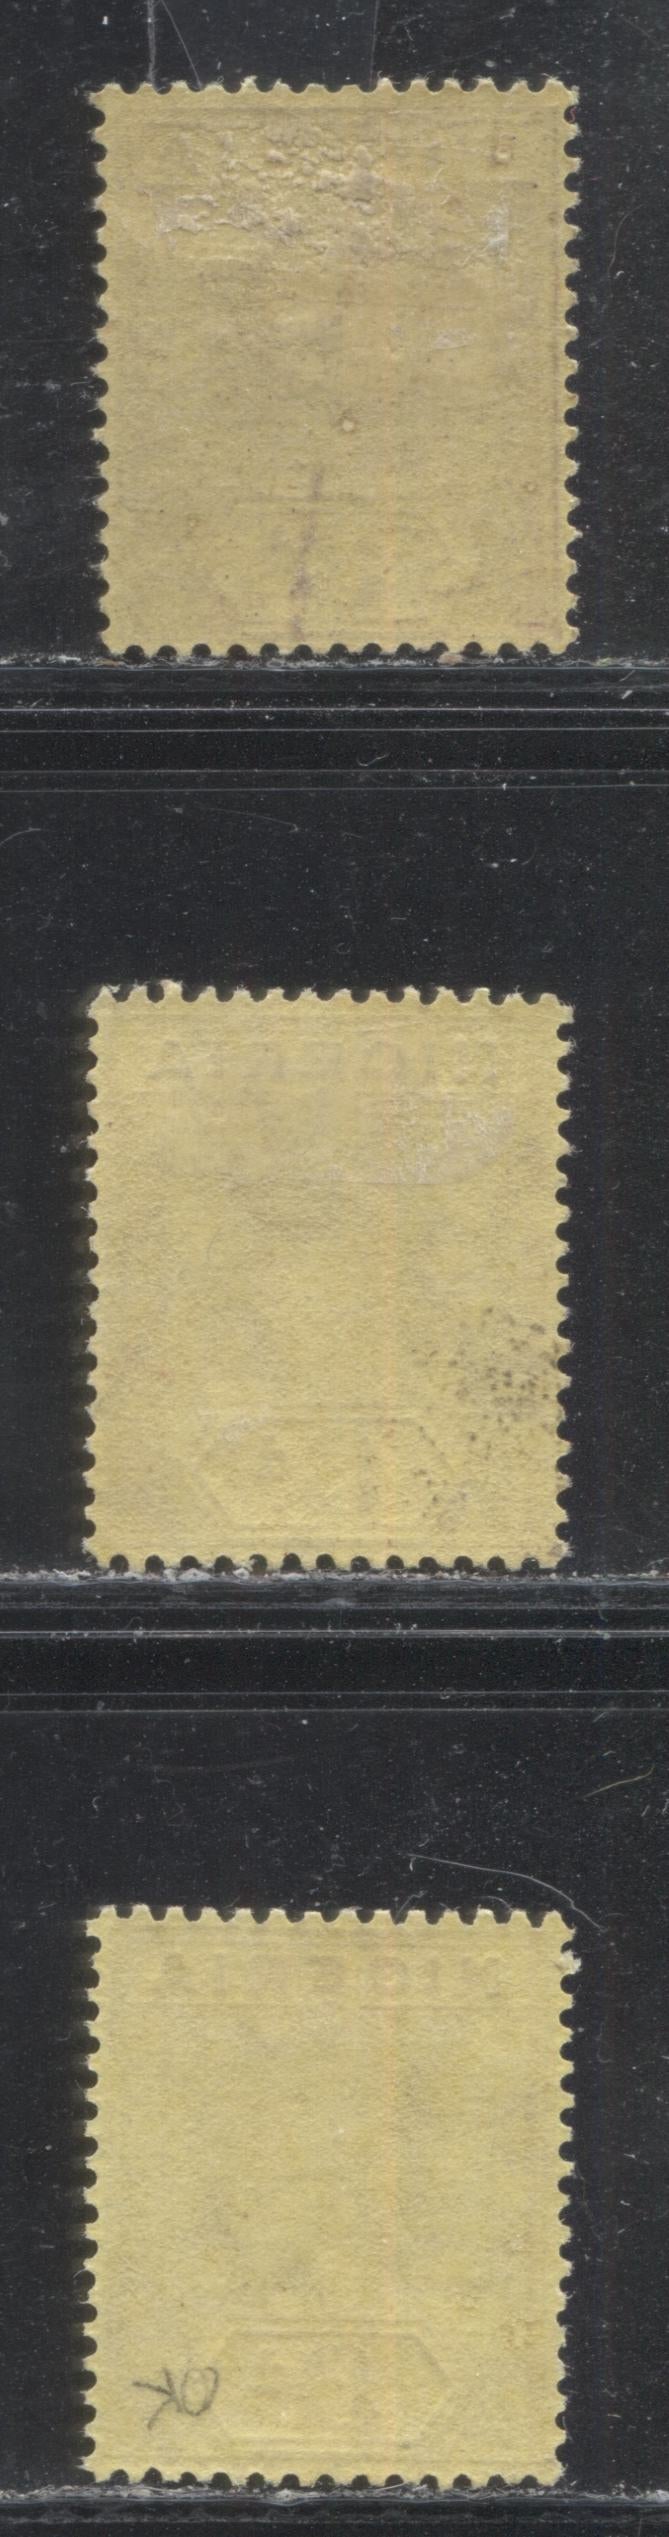 Lot 192 Nigeria SG# 5e 3d Chocolate & Dull Purple on Yellow Paper With Pale Yellow Back King George V, 1914-1921 Multiple Crown CA Imperium Keyplate Issue, Three VFOG Examples, From Different Printings, Each a Slightly Different Shade